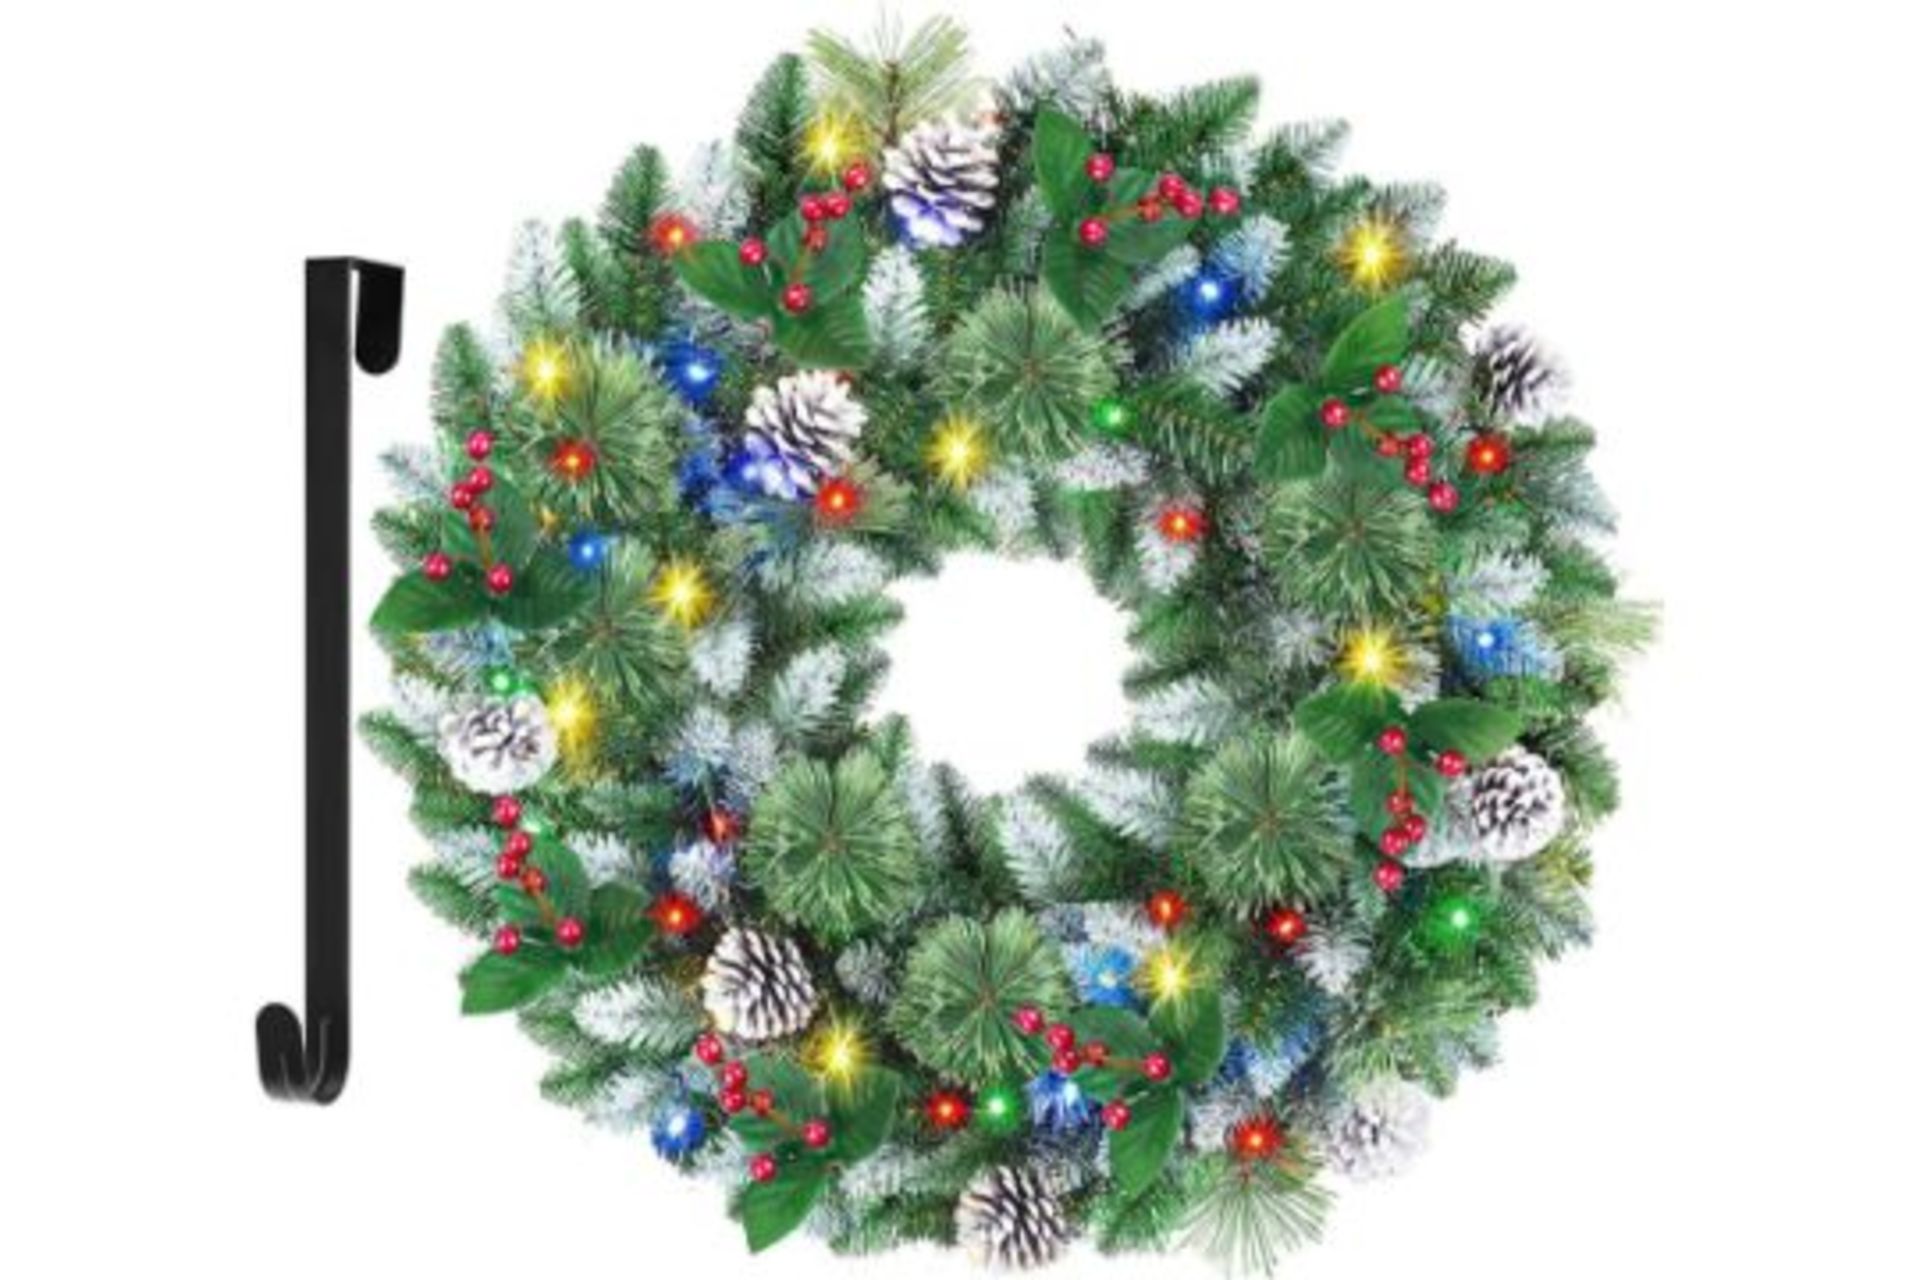 RRP £31.99 SHareconn 60 cm/24 Inch Xmax Christmas Wreaths for Front Door, Large Artificial Christmas